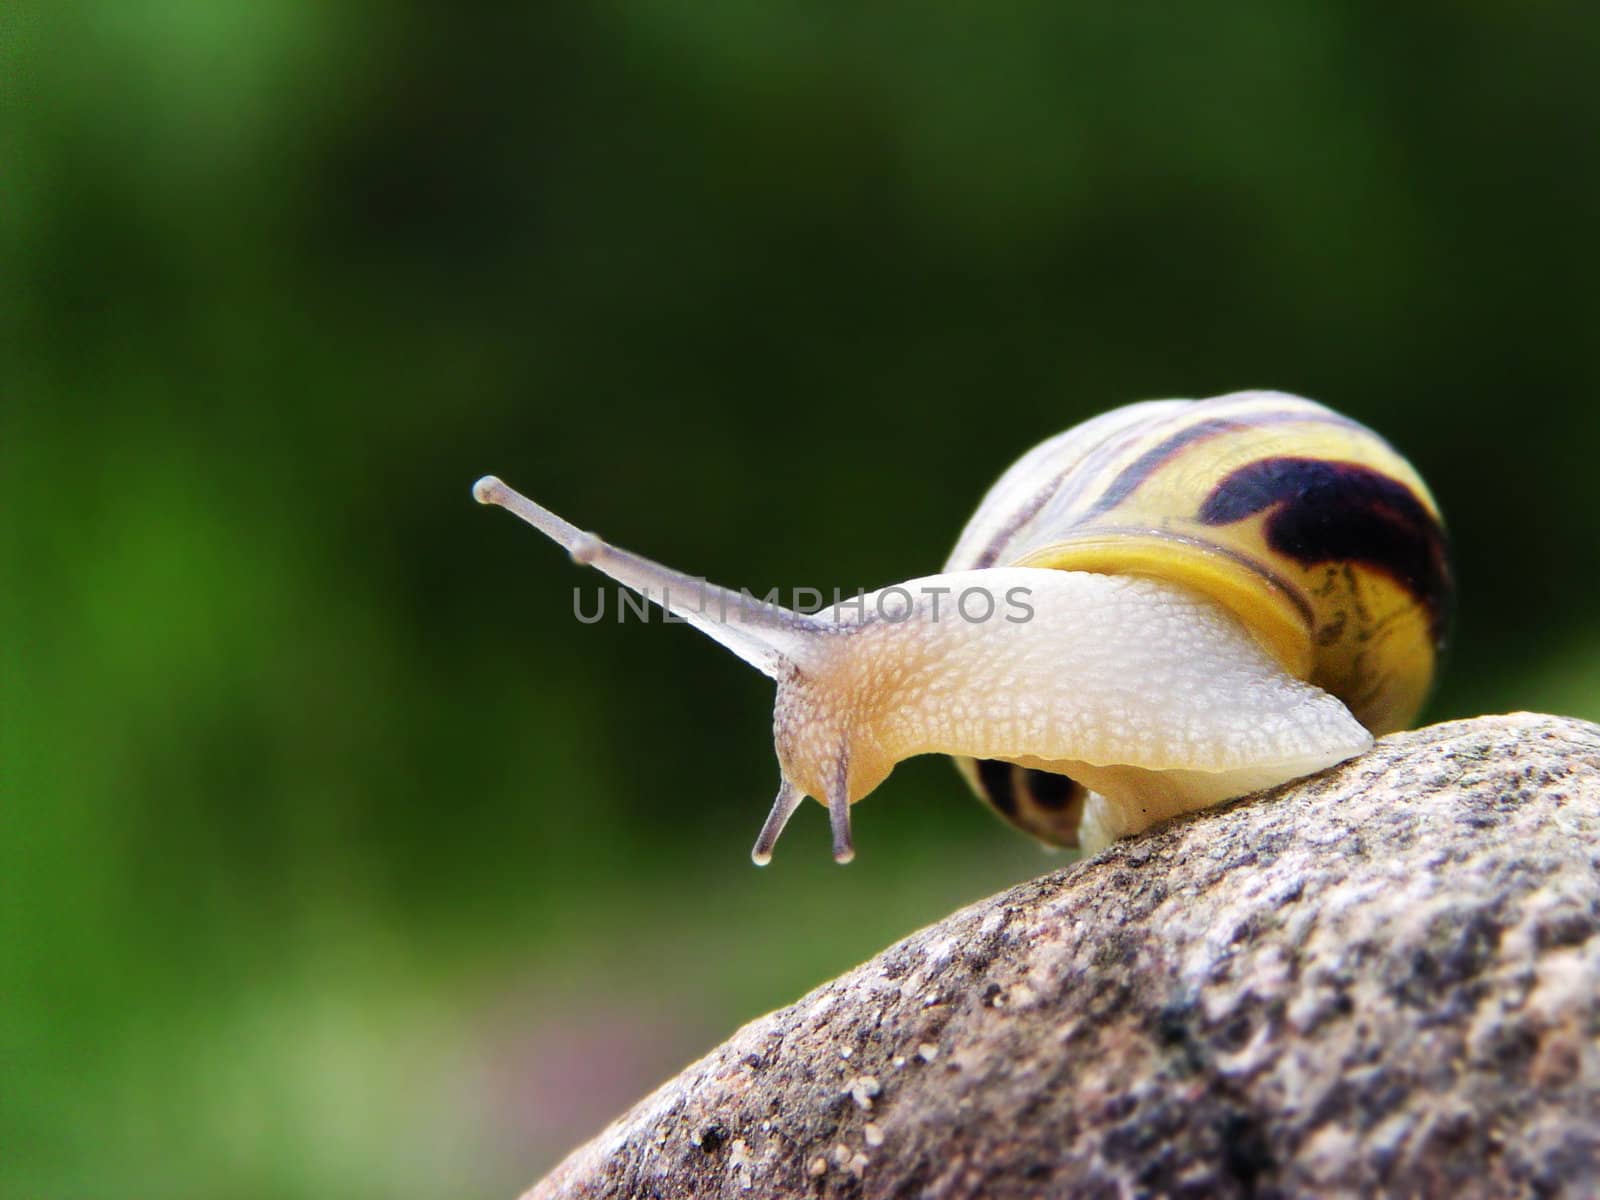 Snail on the stone with green background